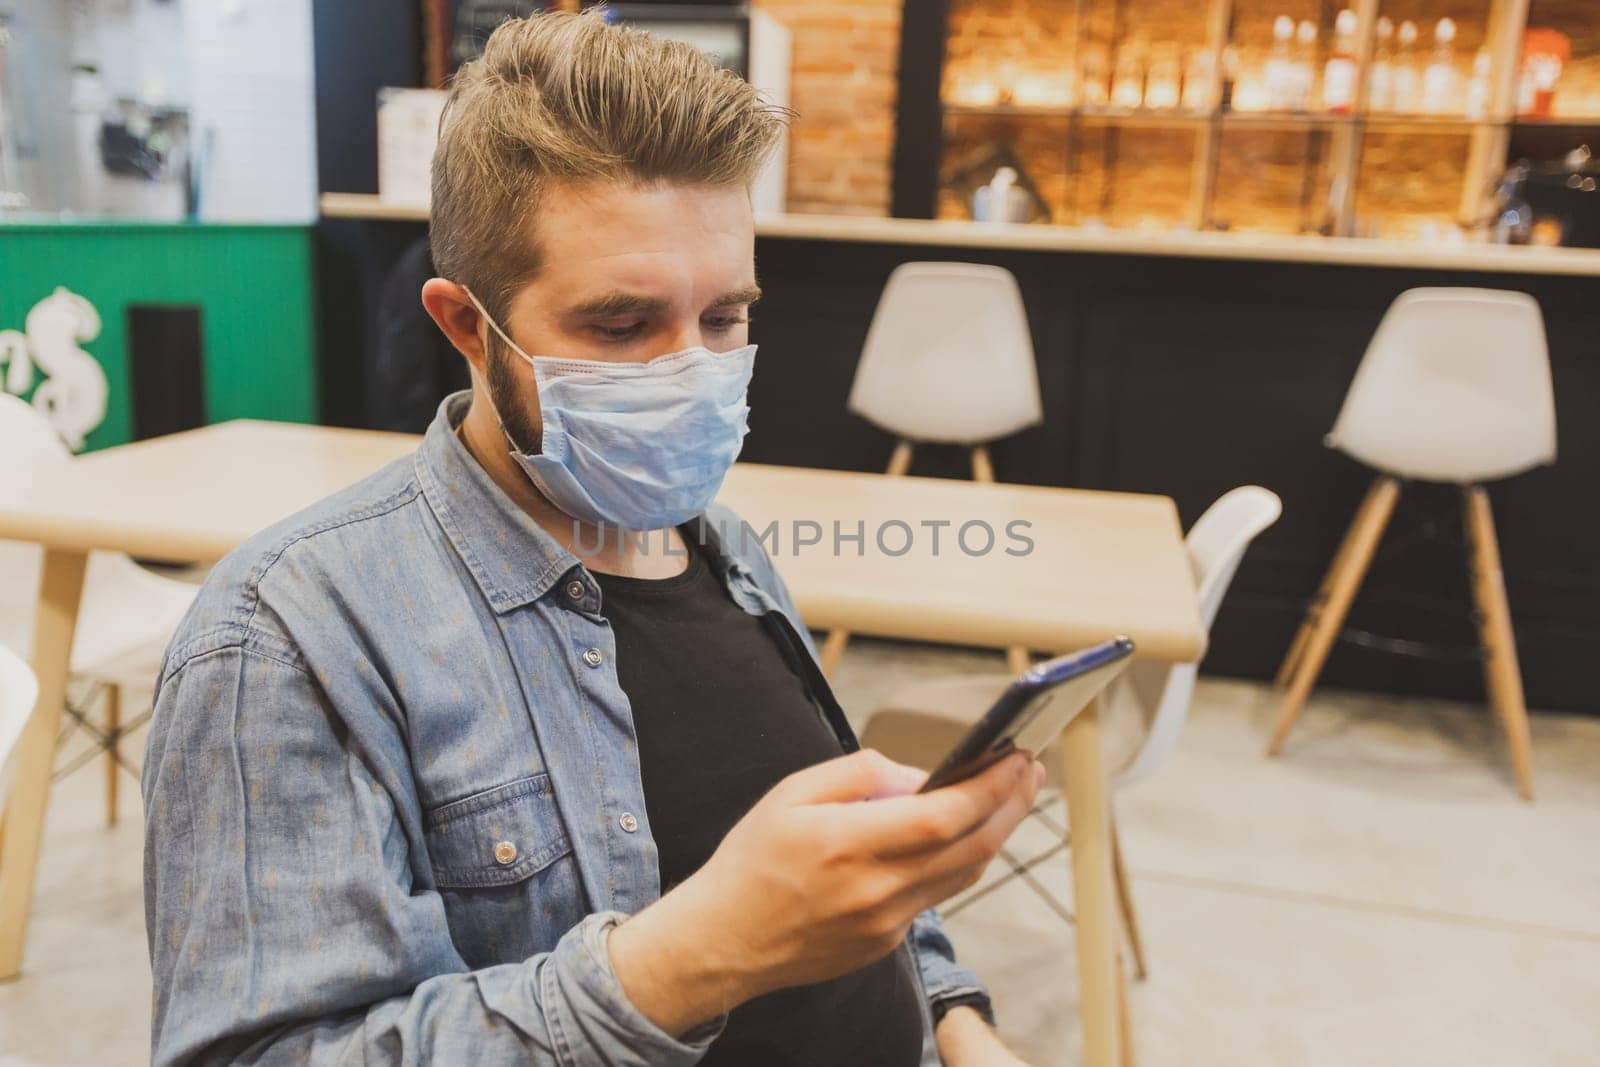 Man wears medical face mask in public area and using smartphone to do work business and social network communication in public cafe work space area. by Satura86